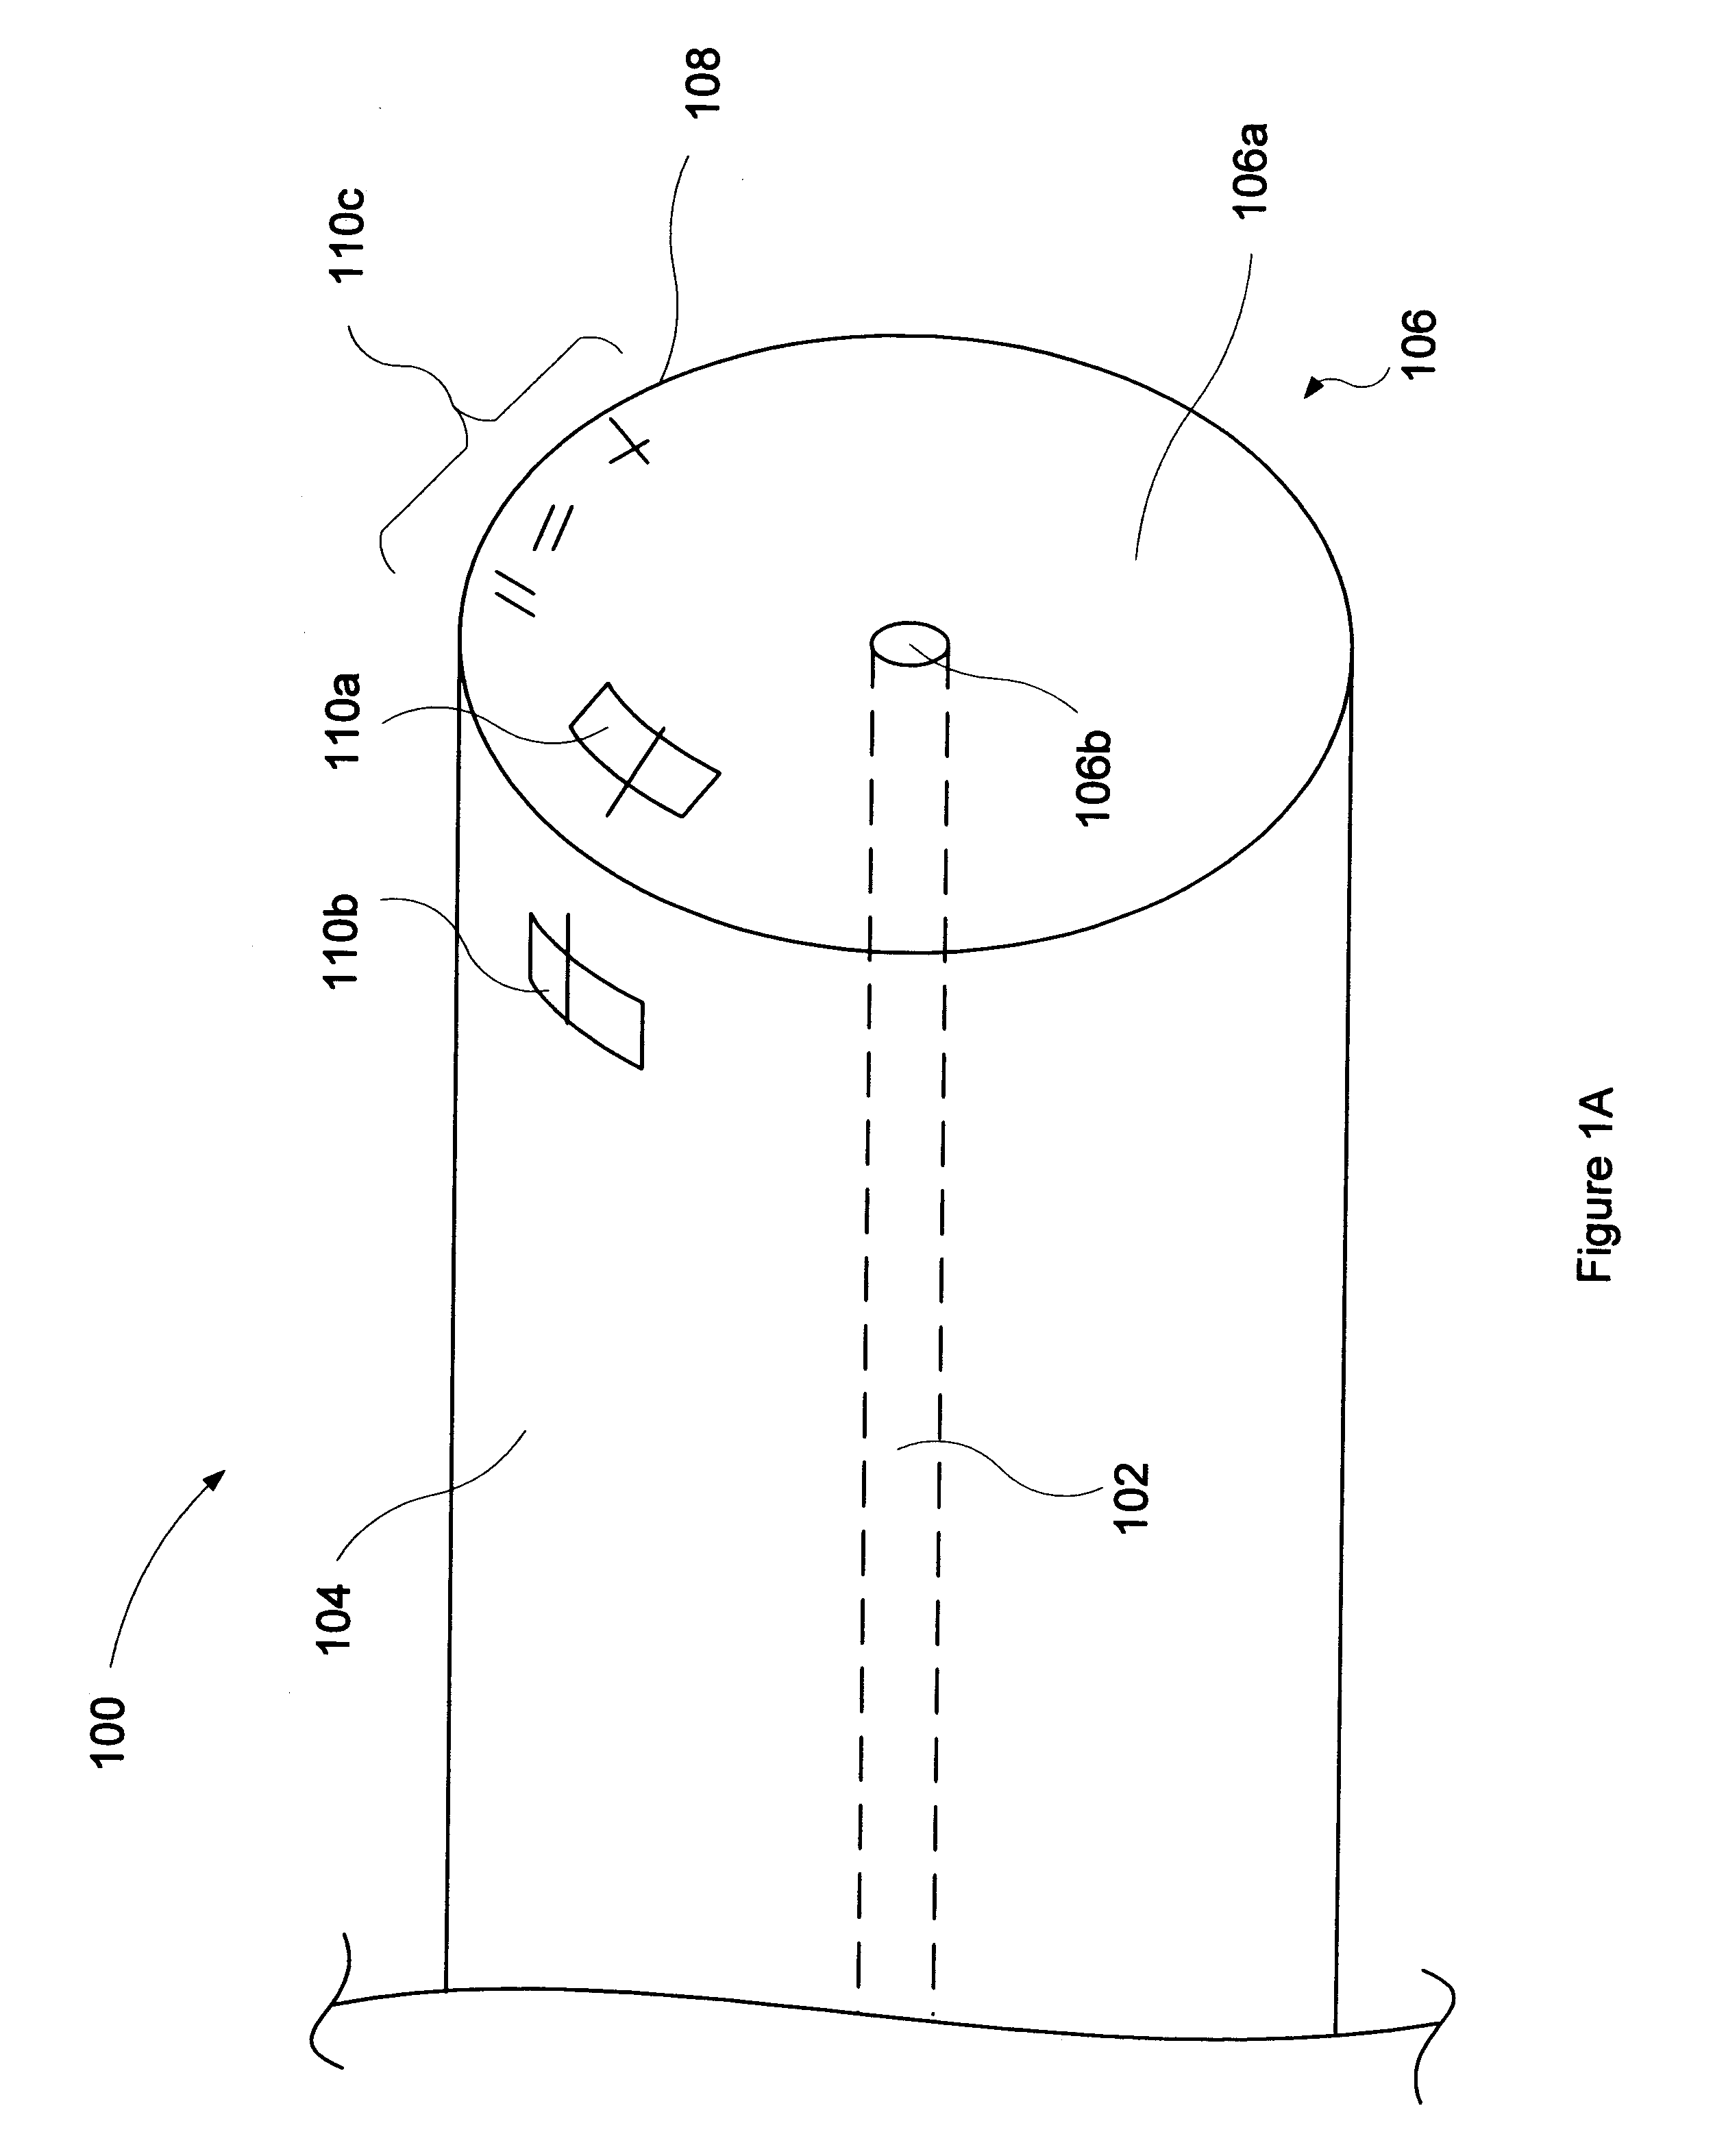 Identifier system and components for optical assemblies